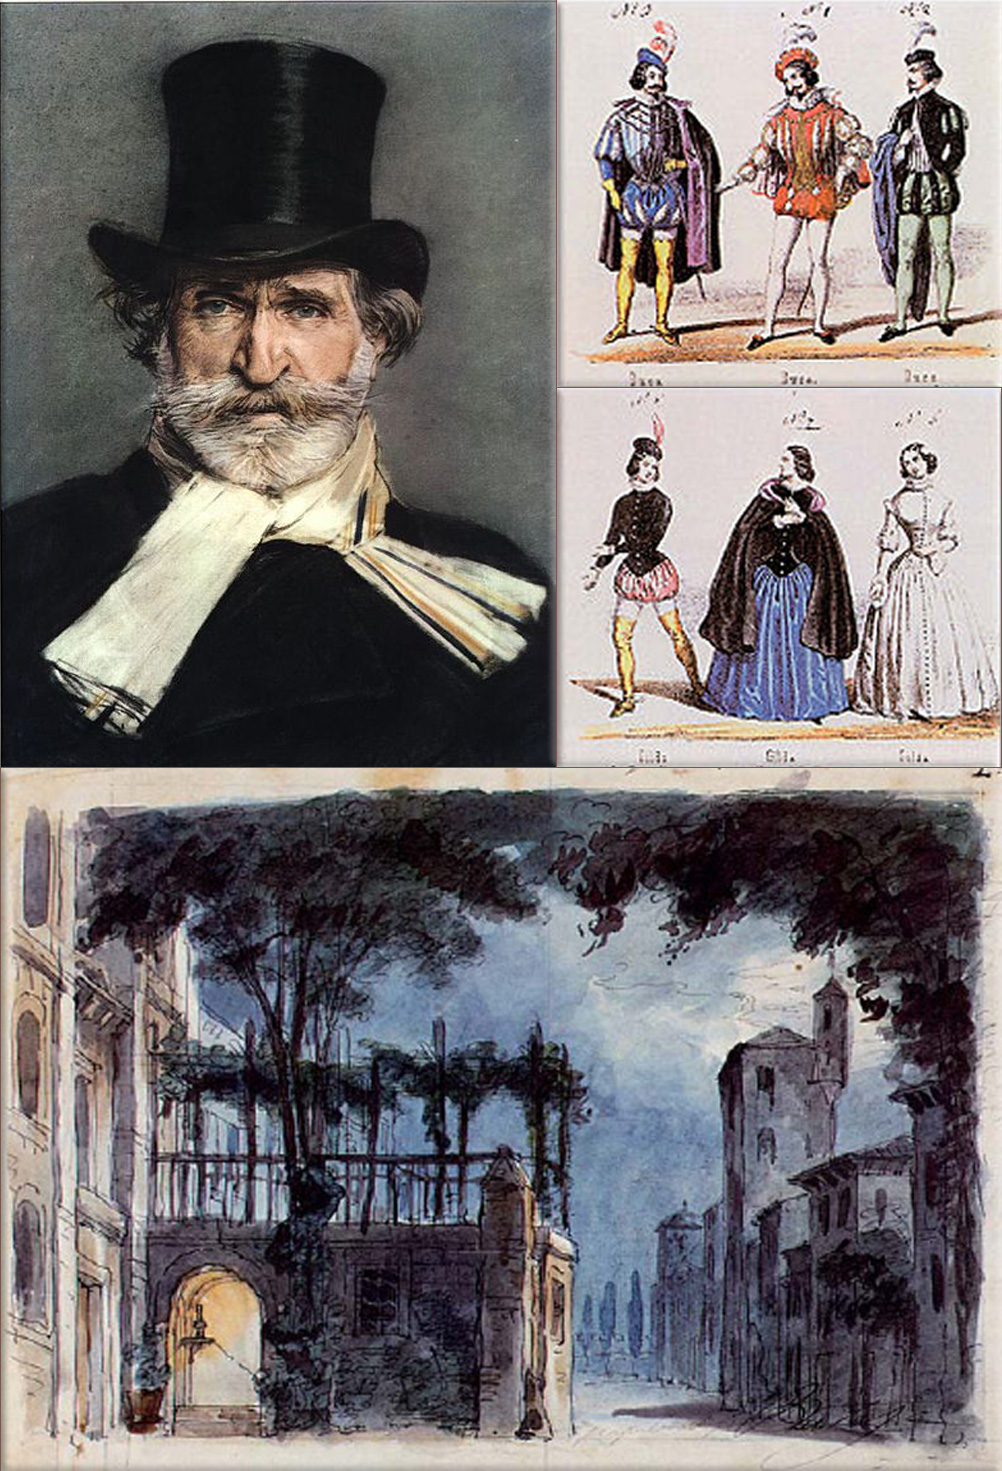 Giuseppe Verdi's The first performance of Rigoletto by Giuseppe Verdi takes place in Venice on March 11th, 1851